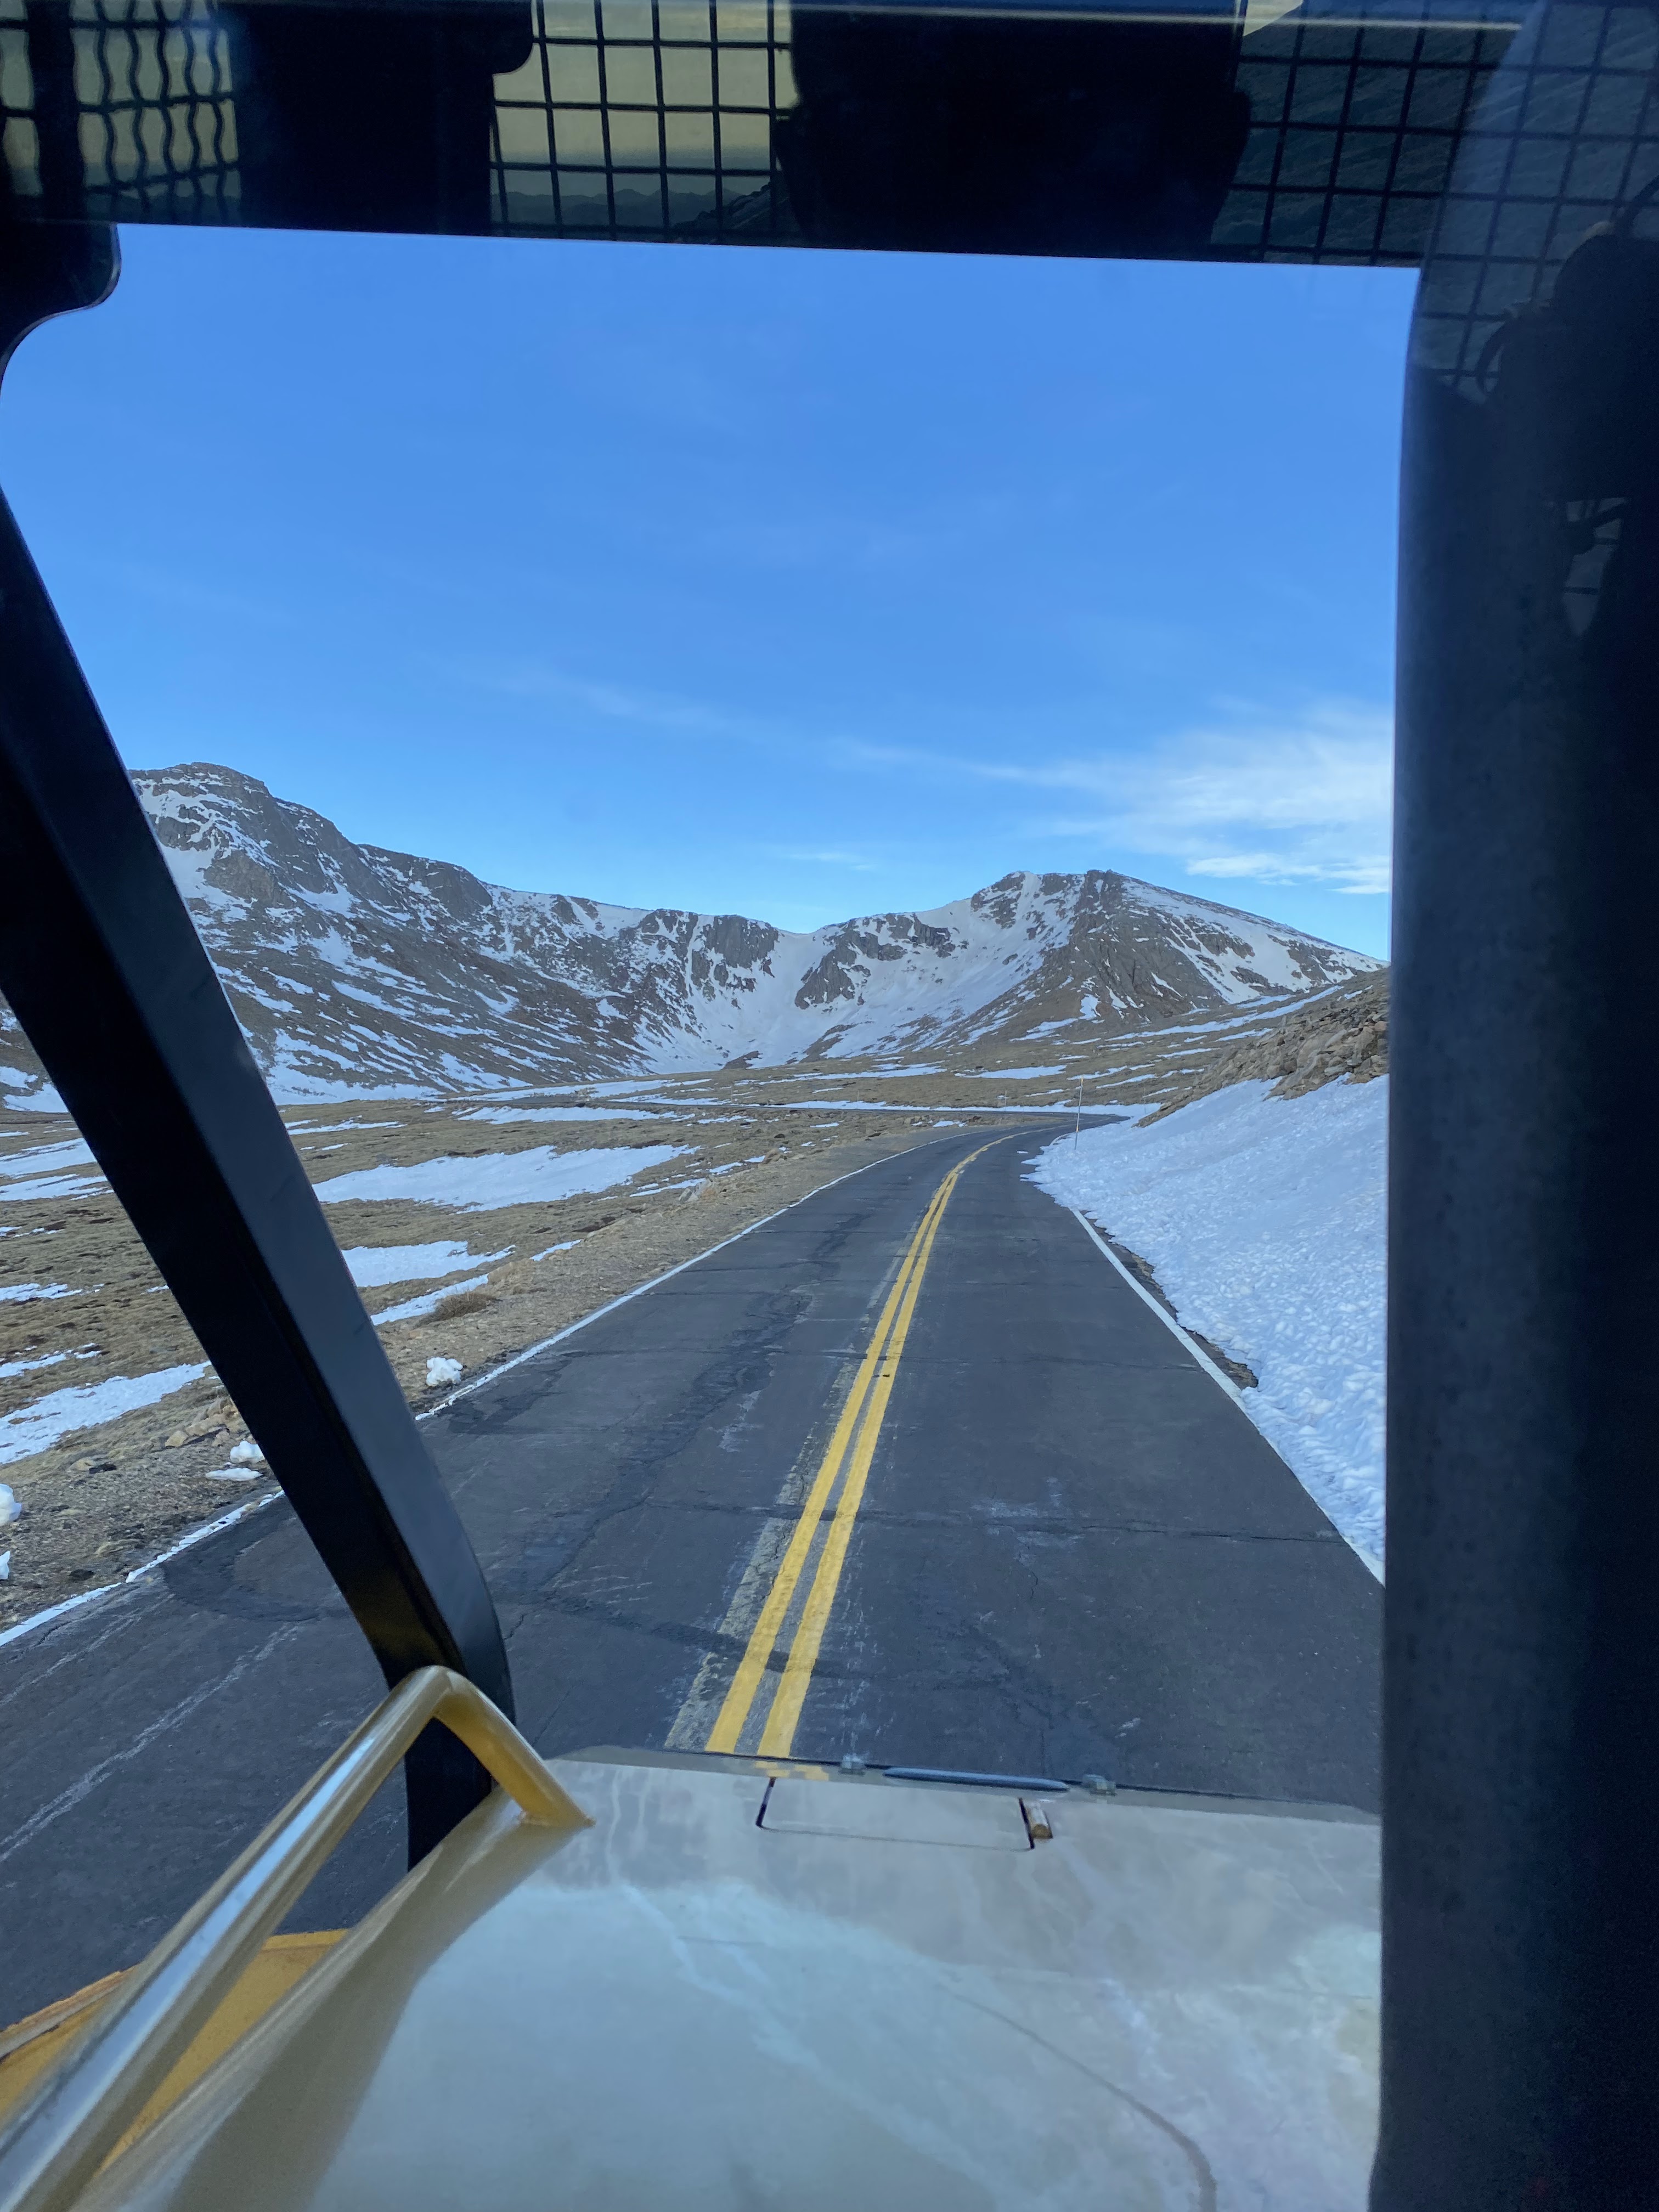 View of Mount Evans and cleared road from the cab of the tractor detail image